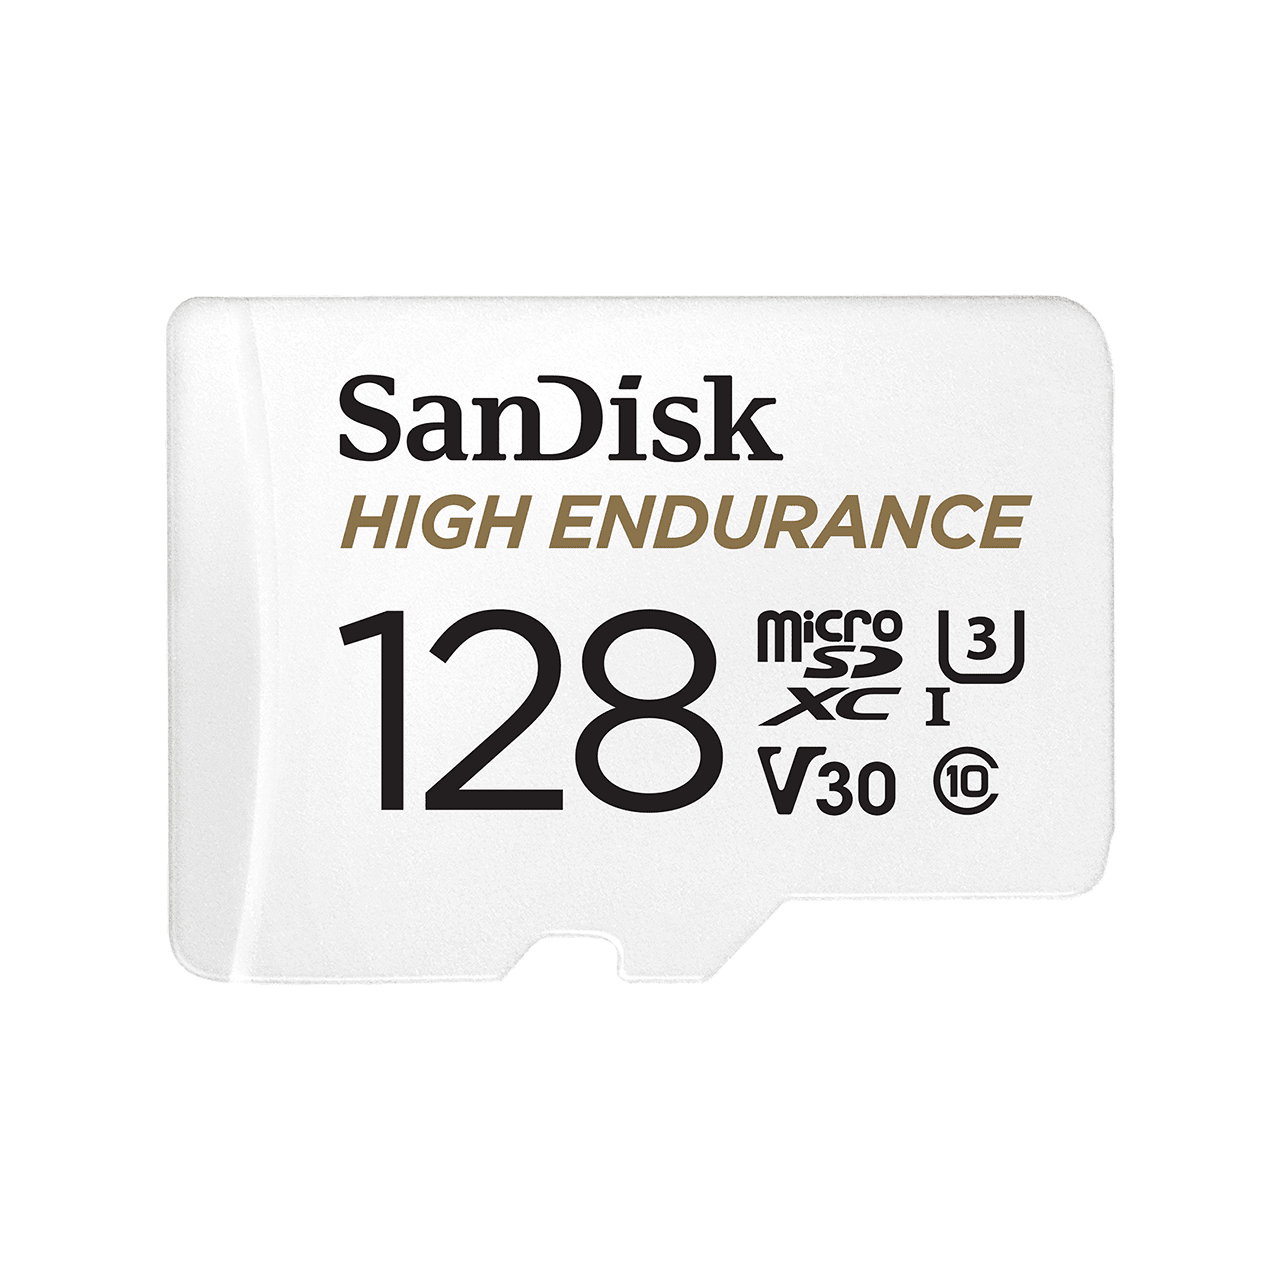 Sandisk High Endurance microSD Class 10 Memory Cards for Dash Cam or Home Monitoring System (32GB / 64GB / 128GB / 256GB) Up to 100MB/s, microSDHC (32GB) & microSDXC Compatible,